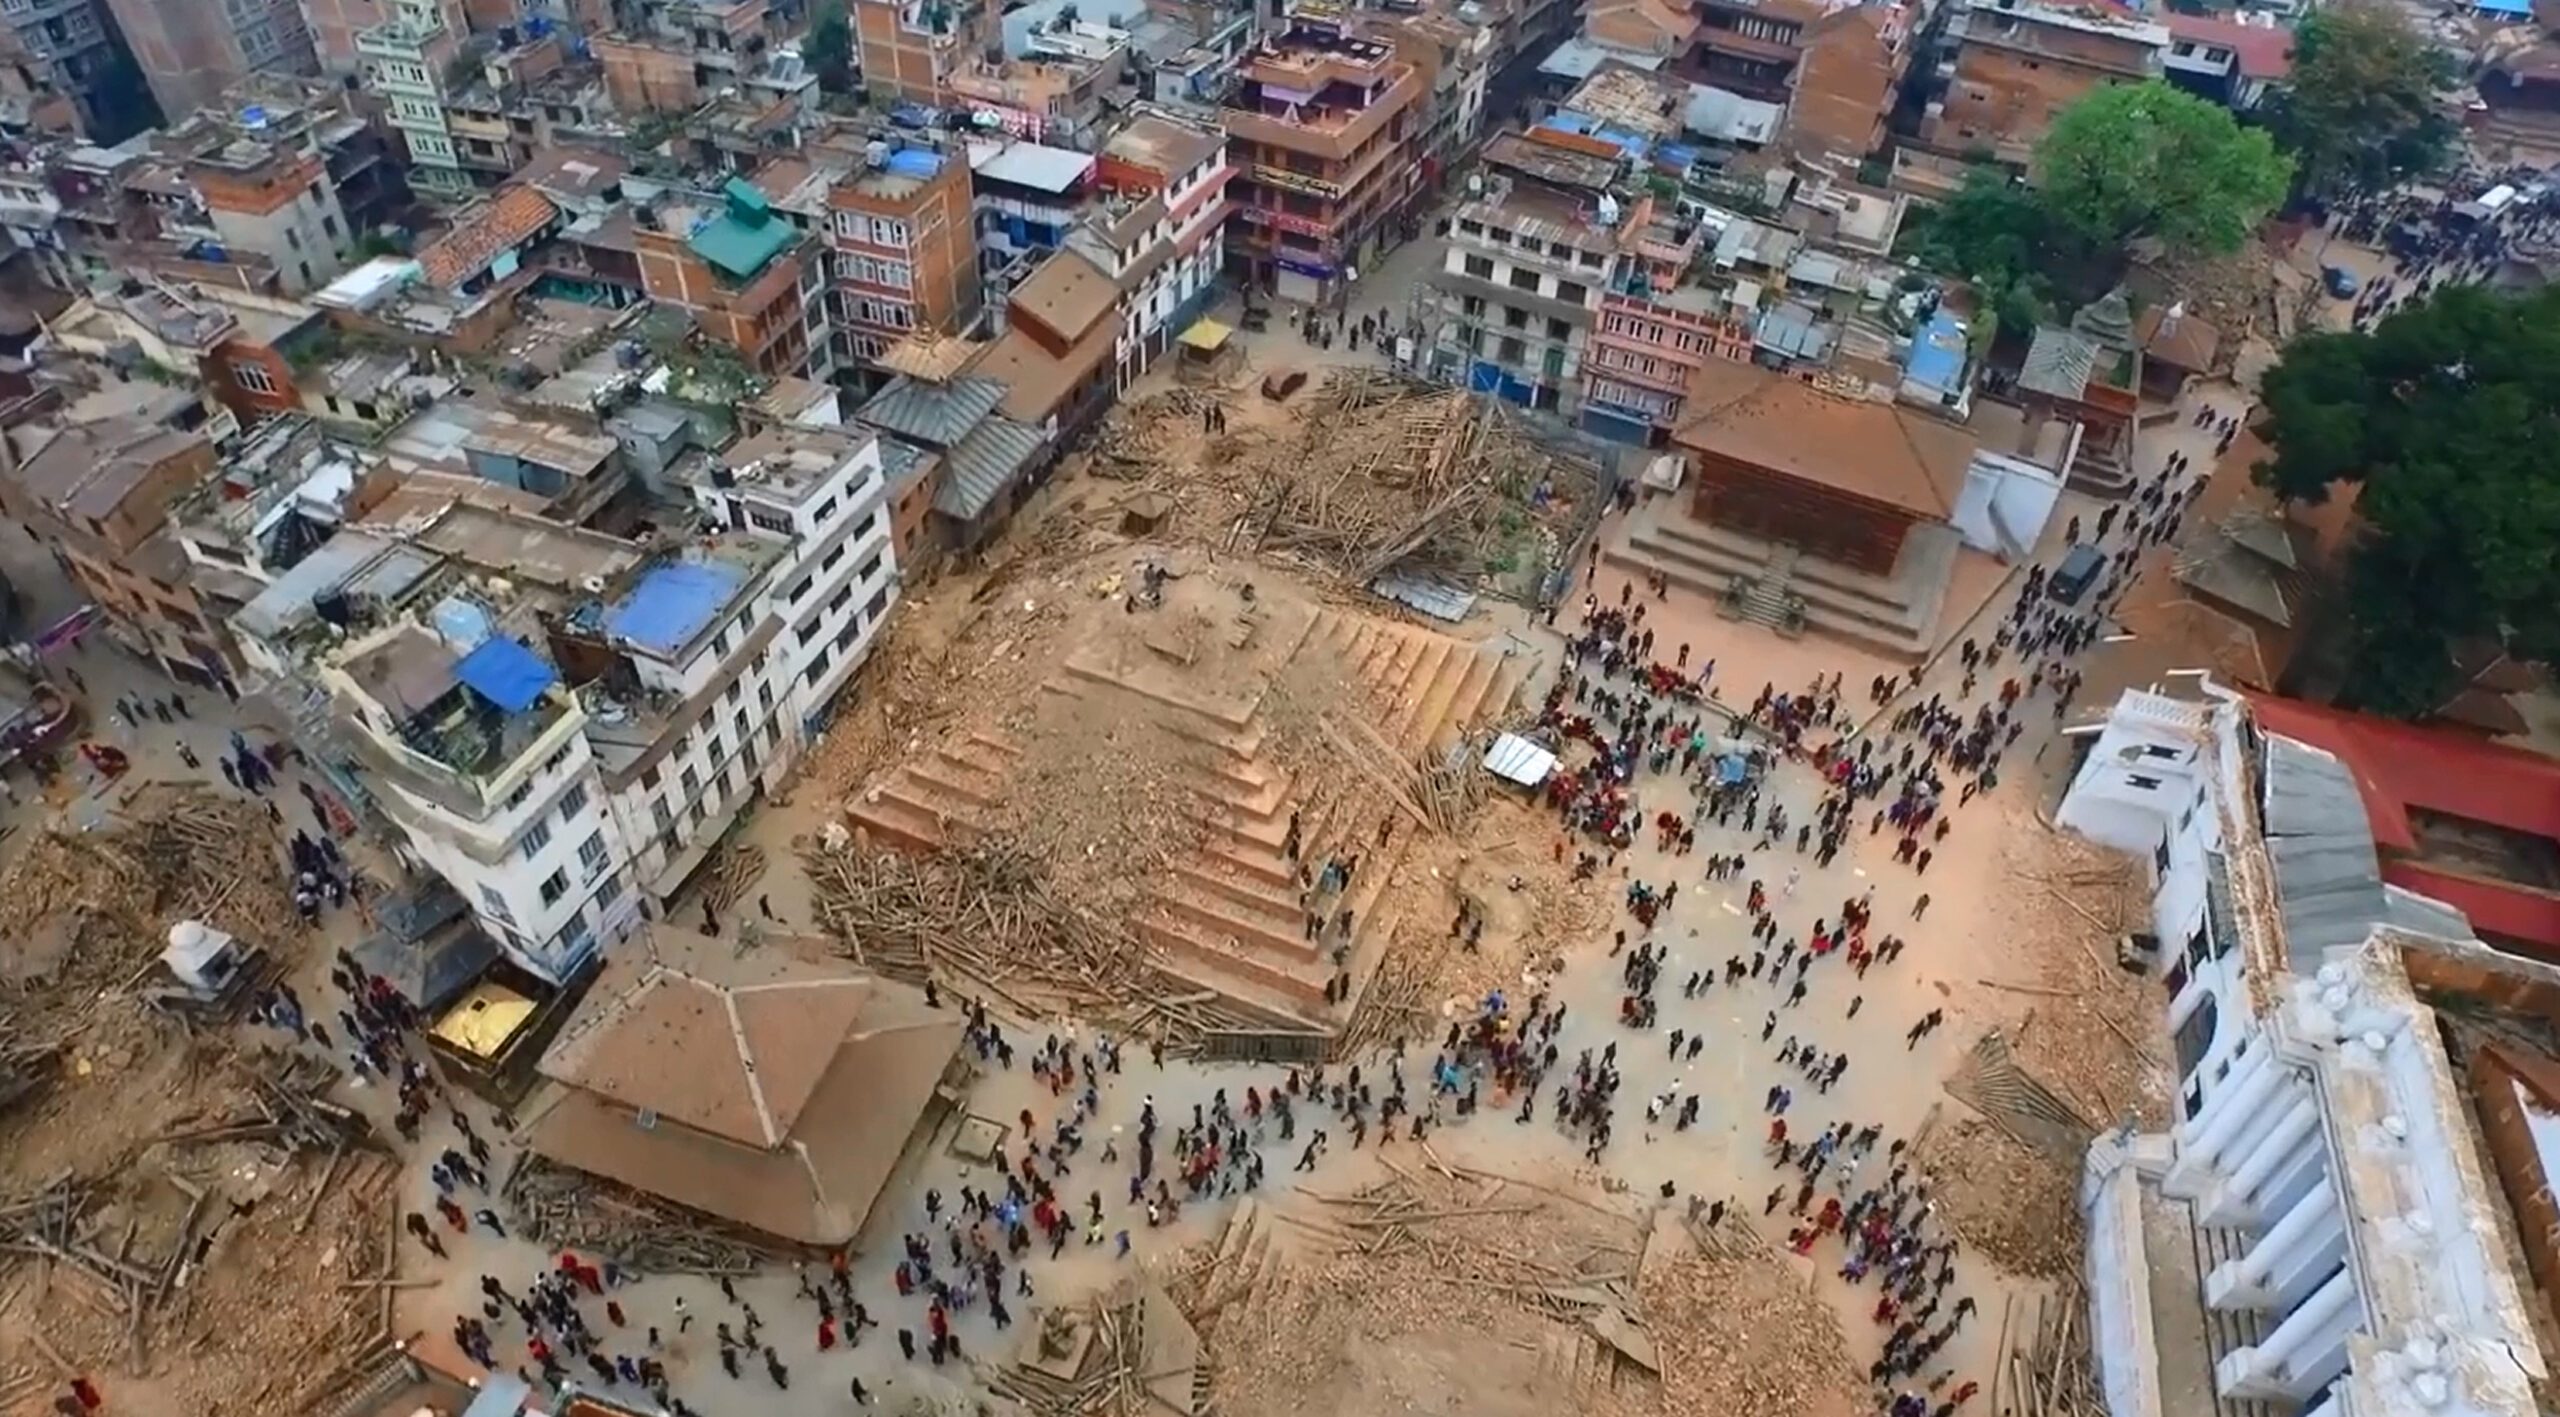 Teenager pulled alive from rubble 5 days after Nepal quake